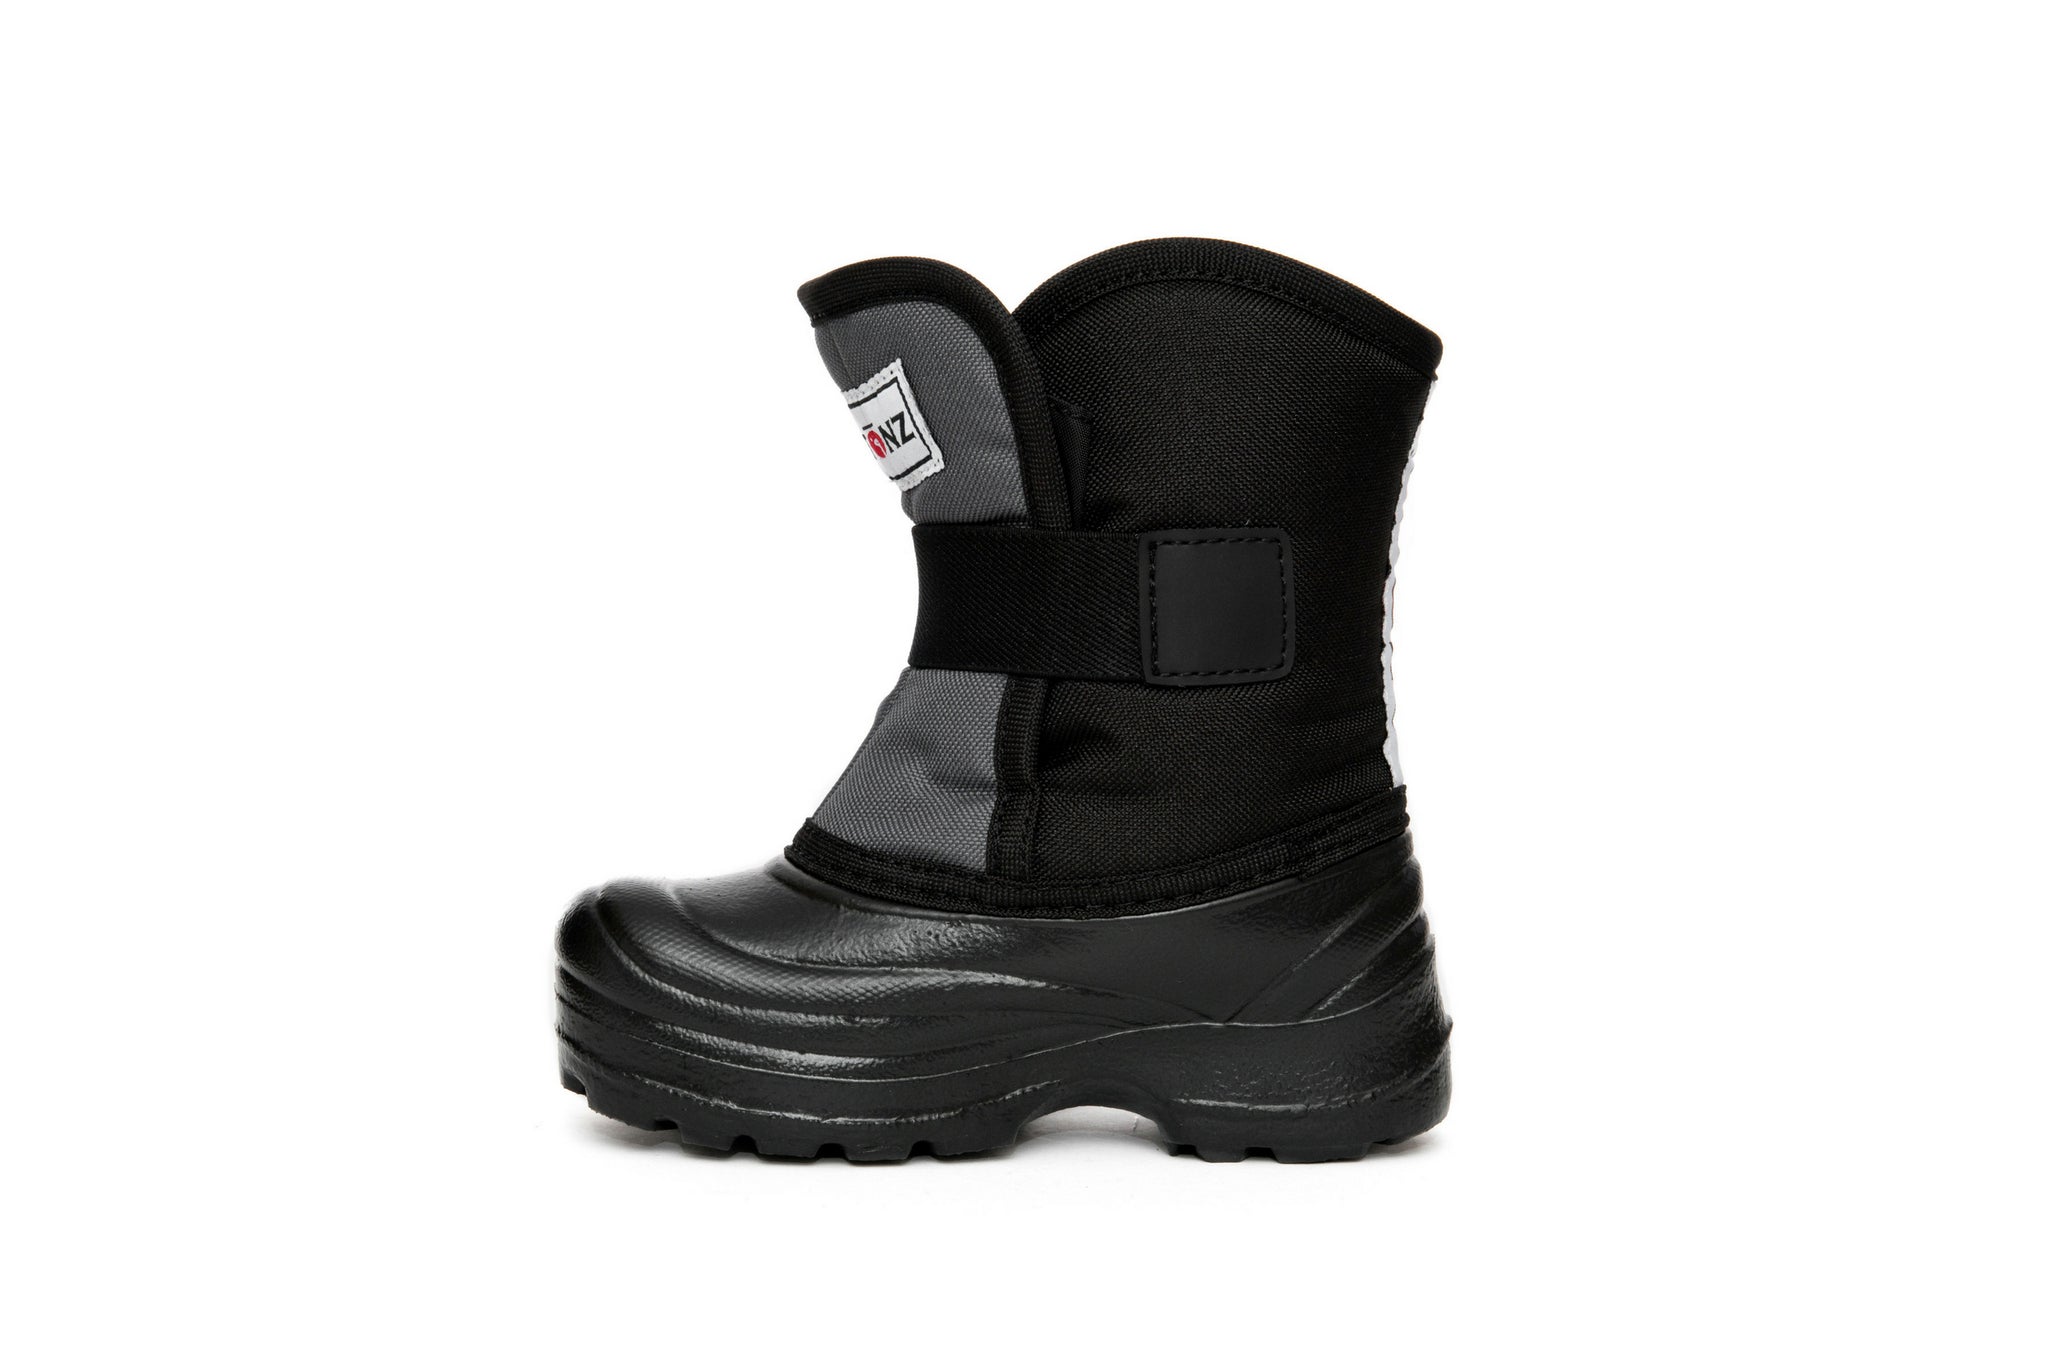 Weather-resistant Winter | Stonz | for Grey/Black - Reflective - Boots Shoes Toddlers Scout